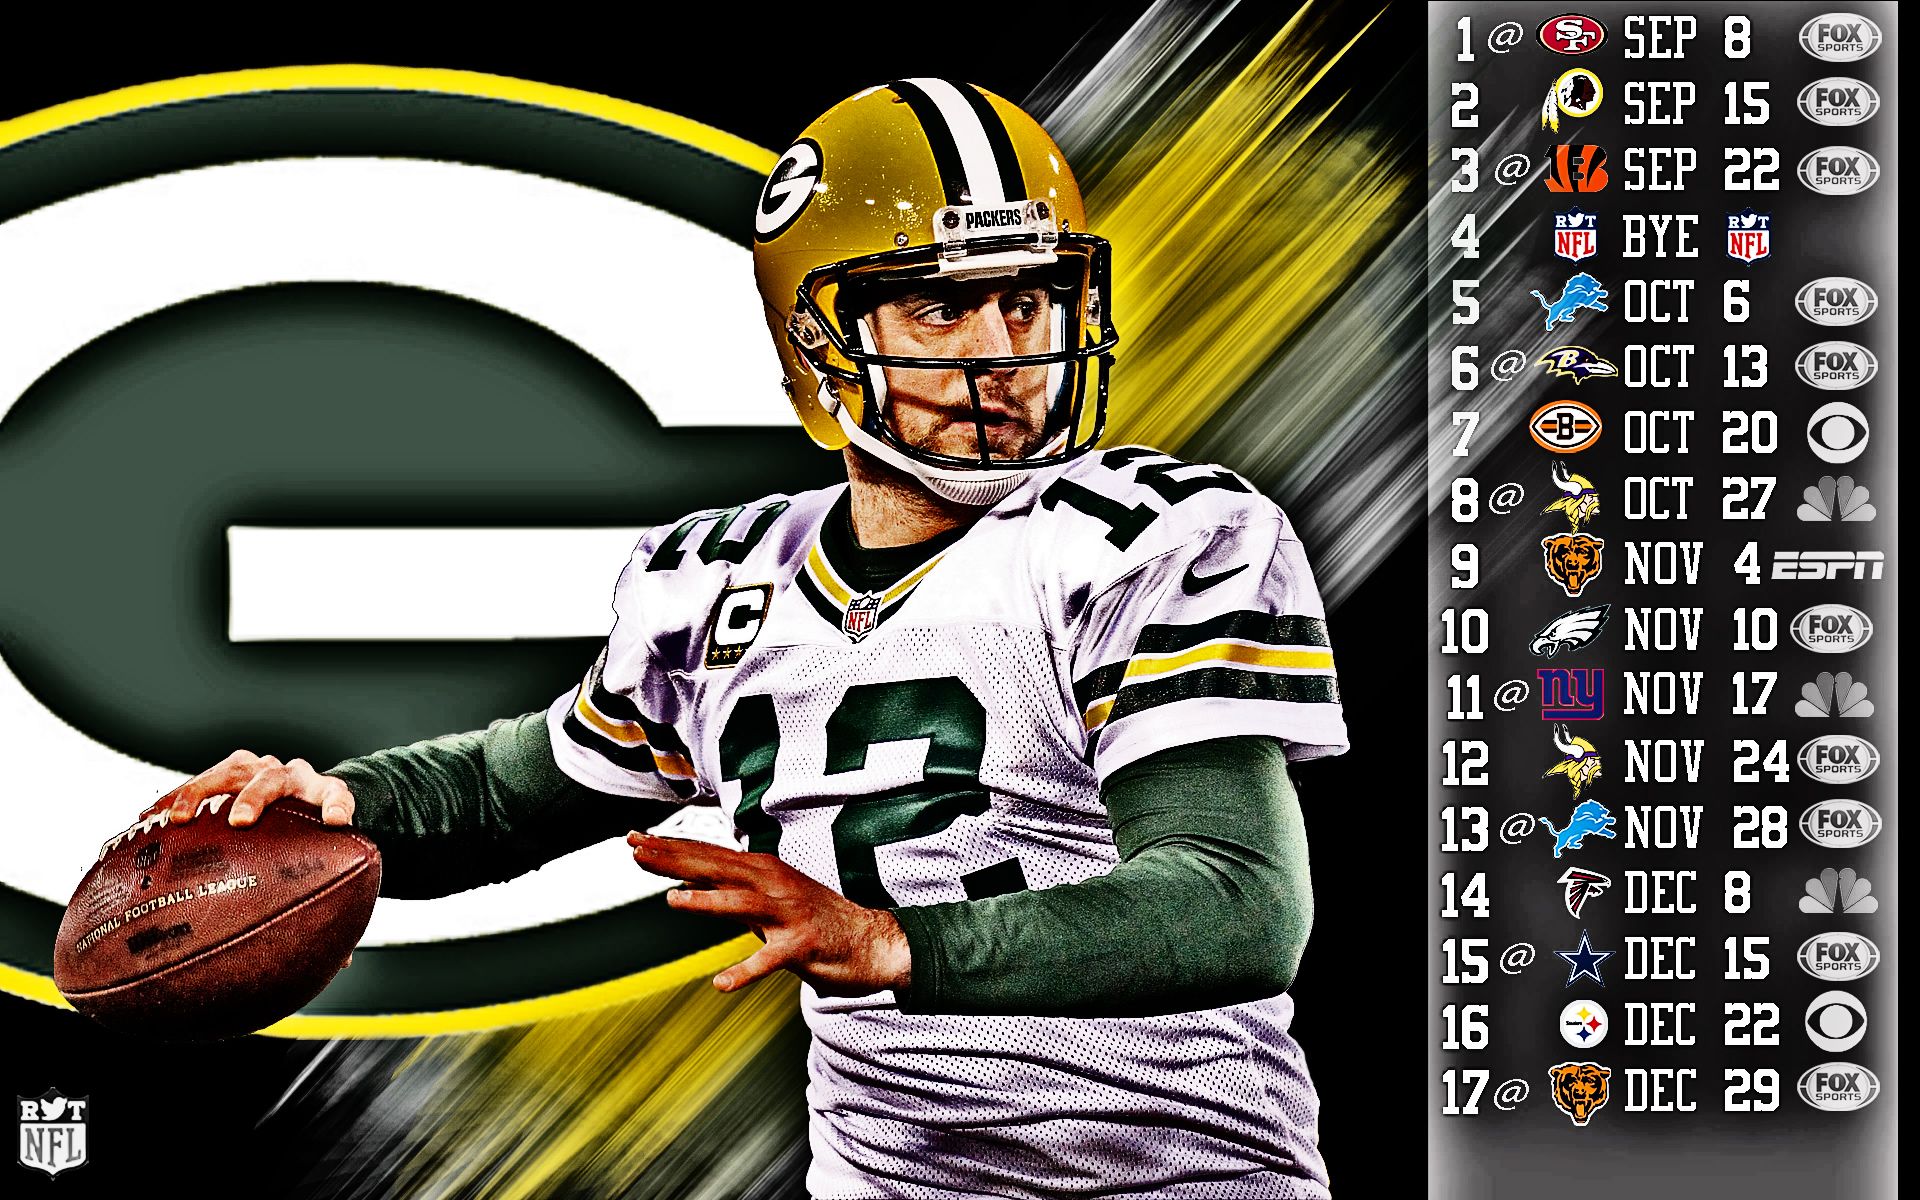 Green Bay Packers 2015 Wallpapers